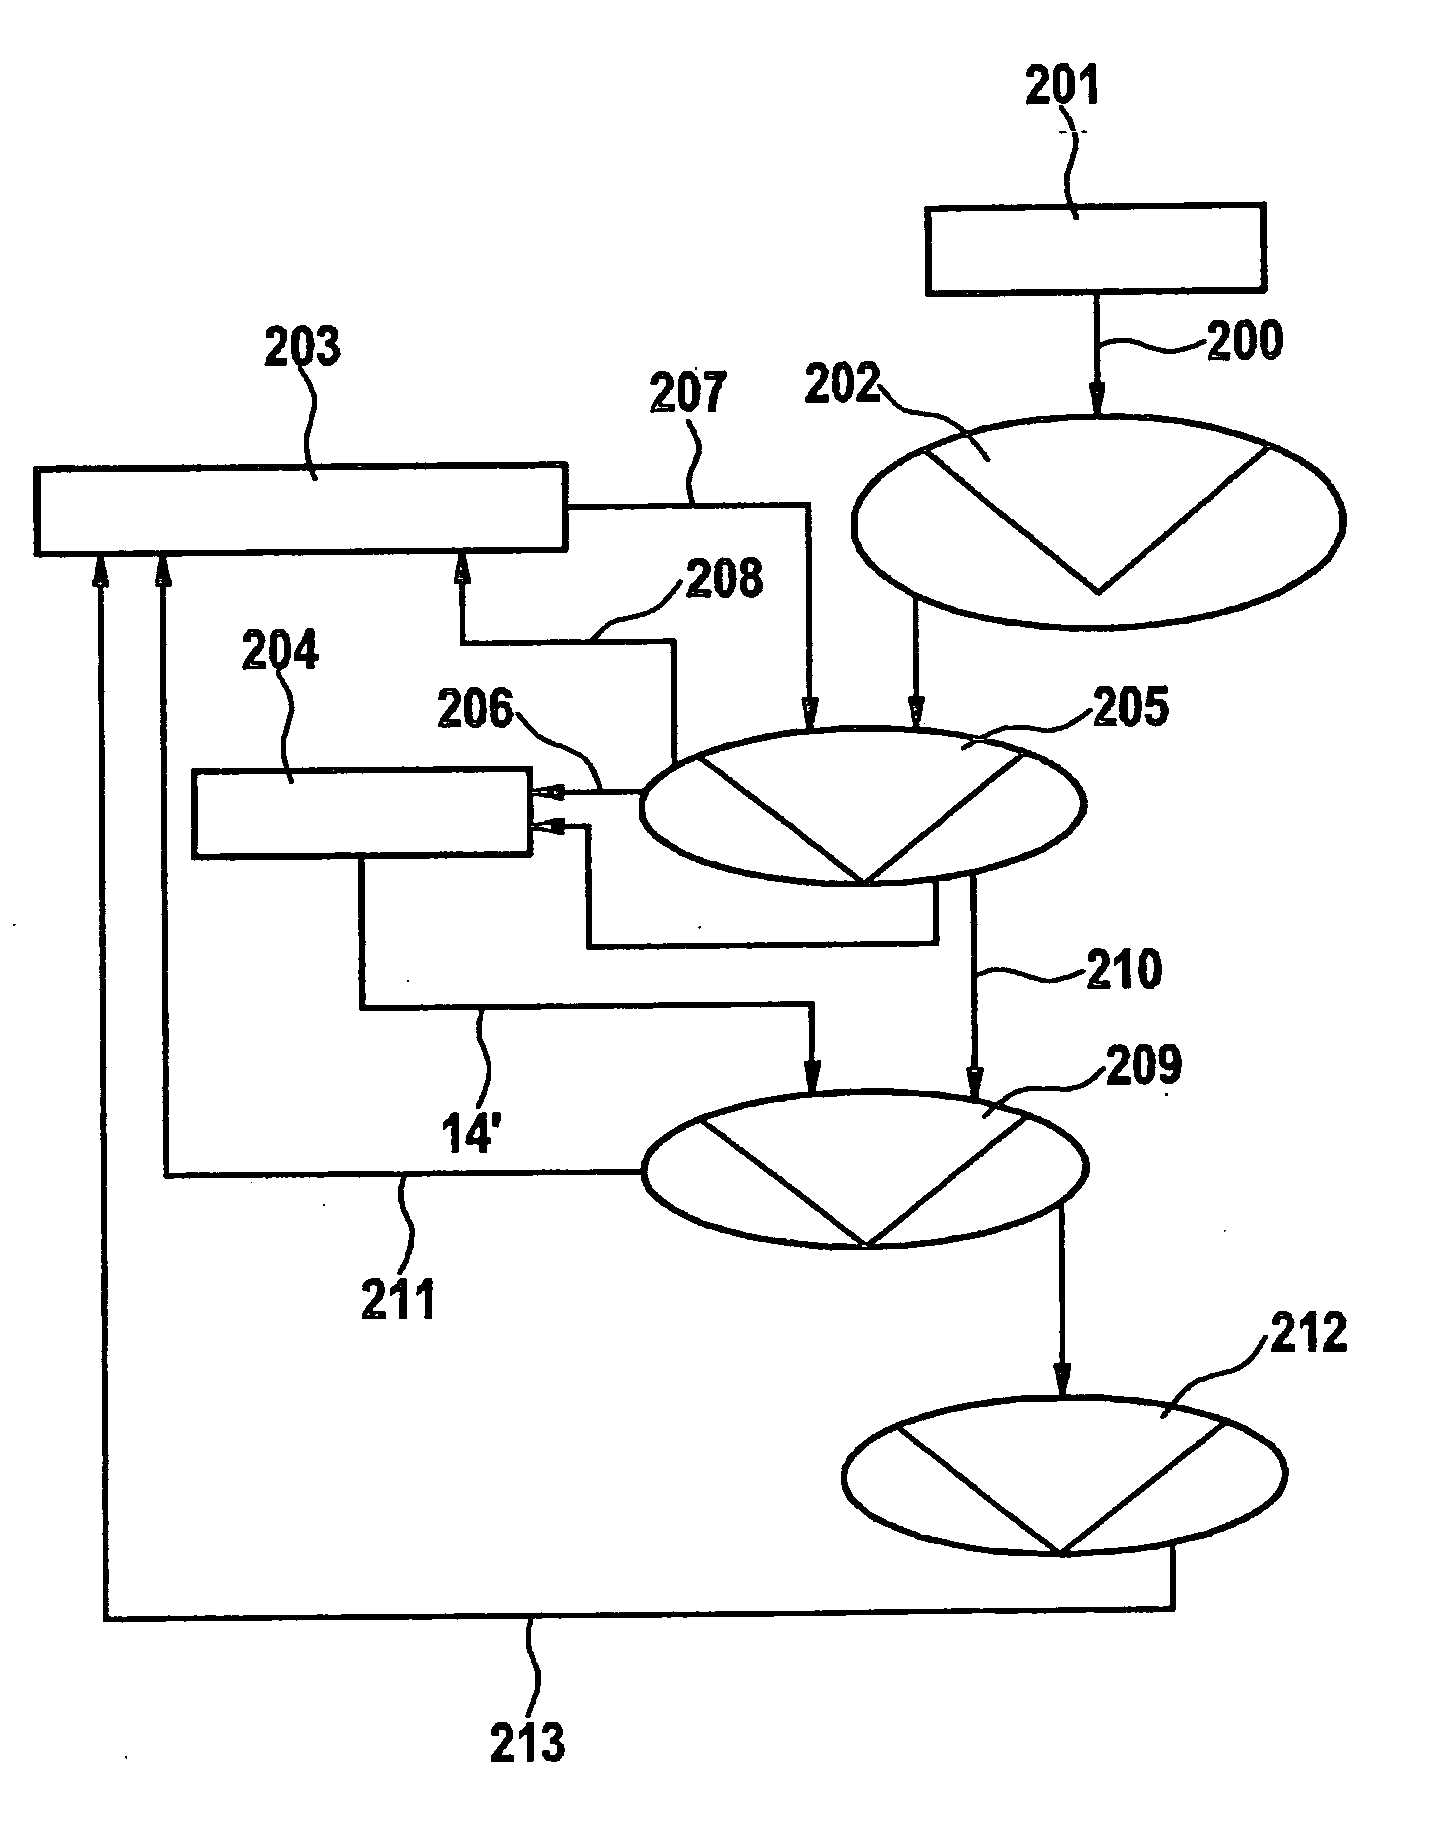 Method for identifying a sequence of input signals